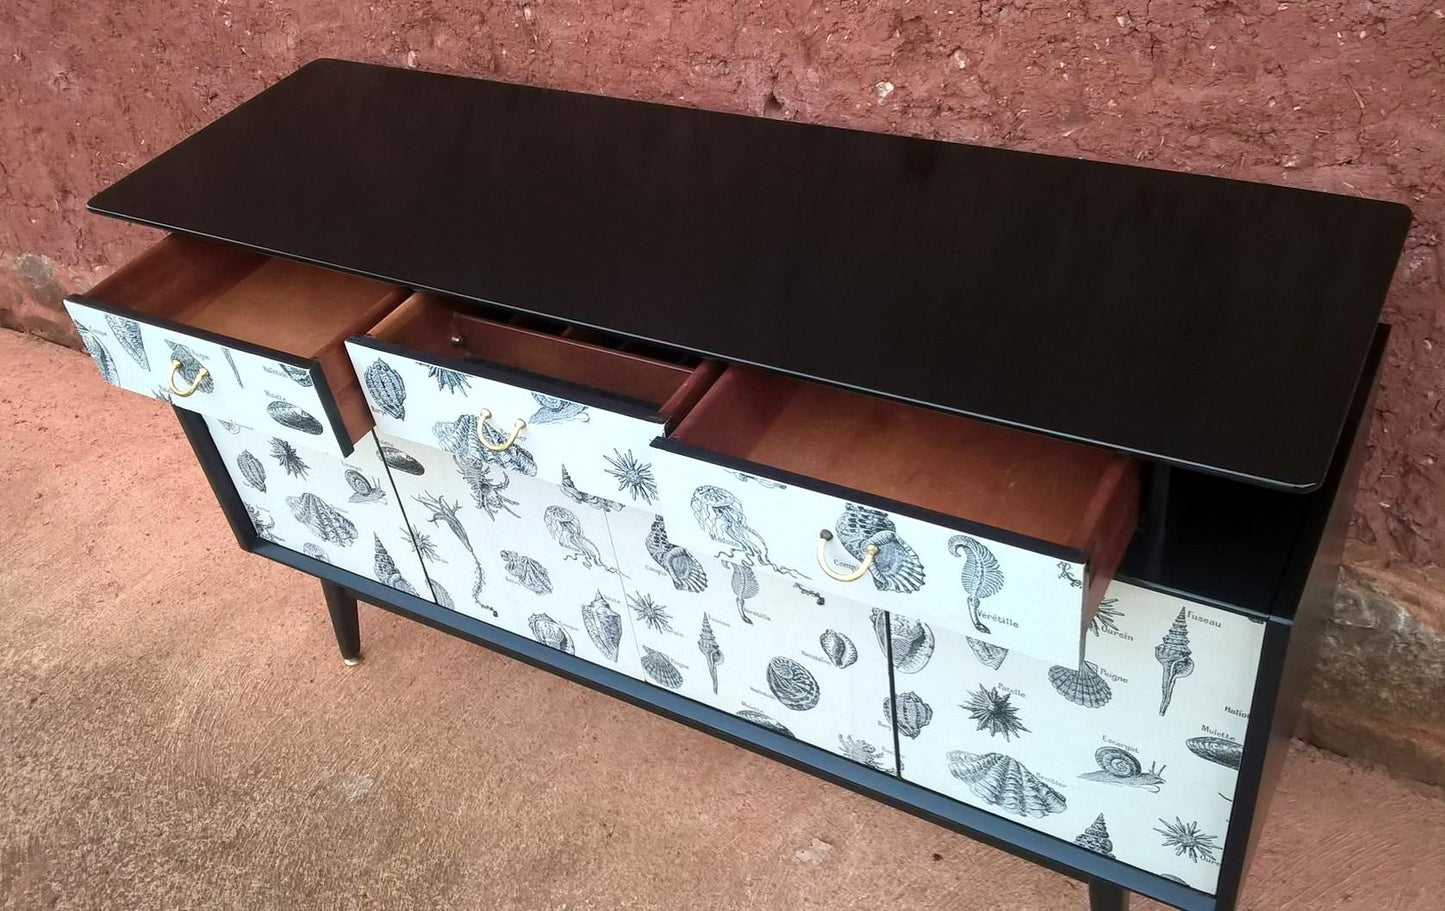 G Plan Sideboard / Retro Upcycled Sideboard